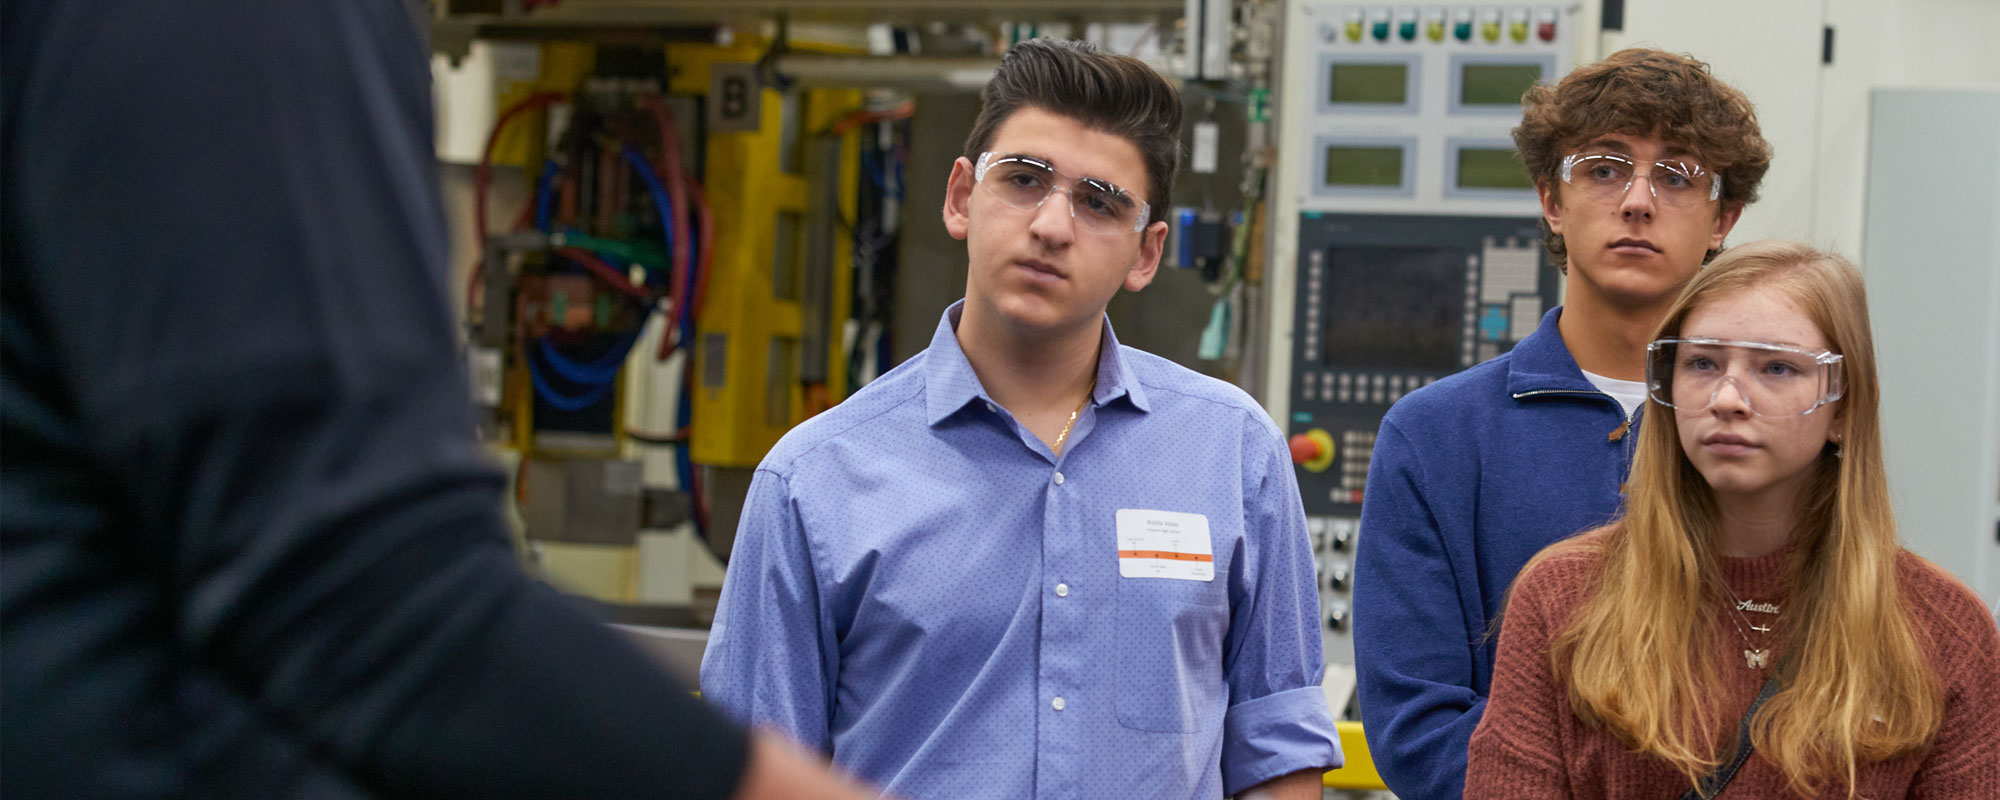 Engineer for a Day: Inspiring Tomorrow’s Innovators